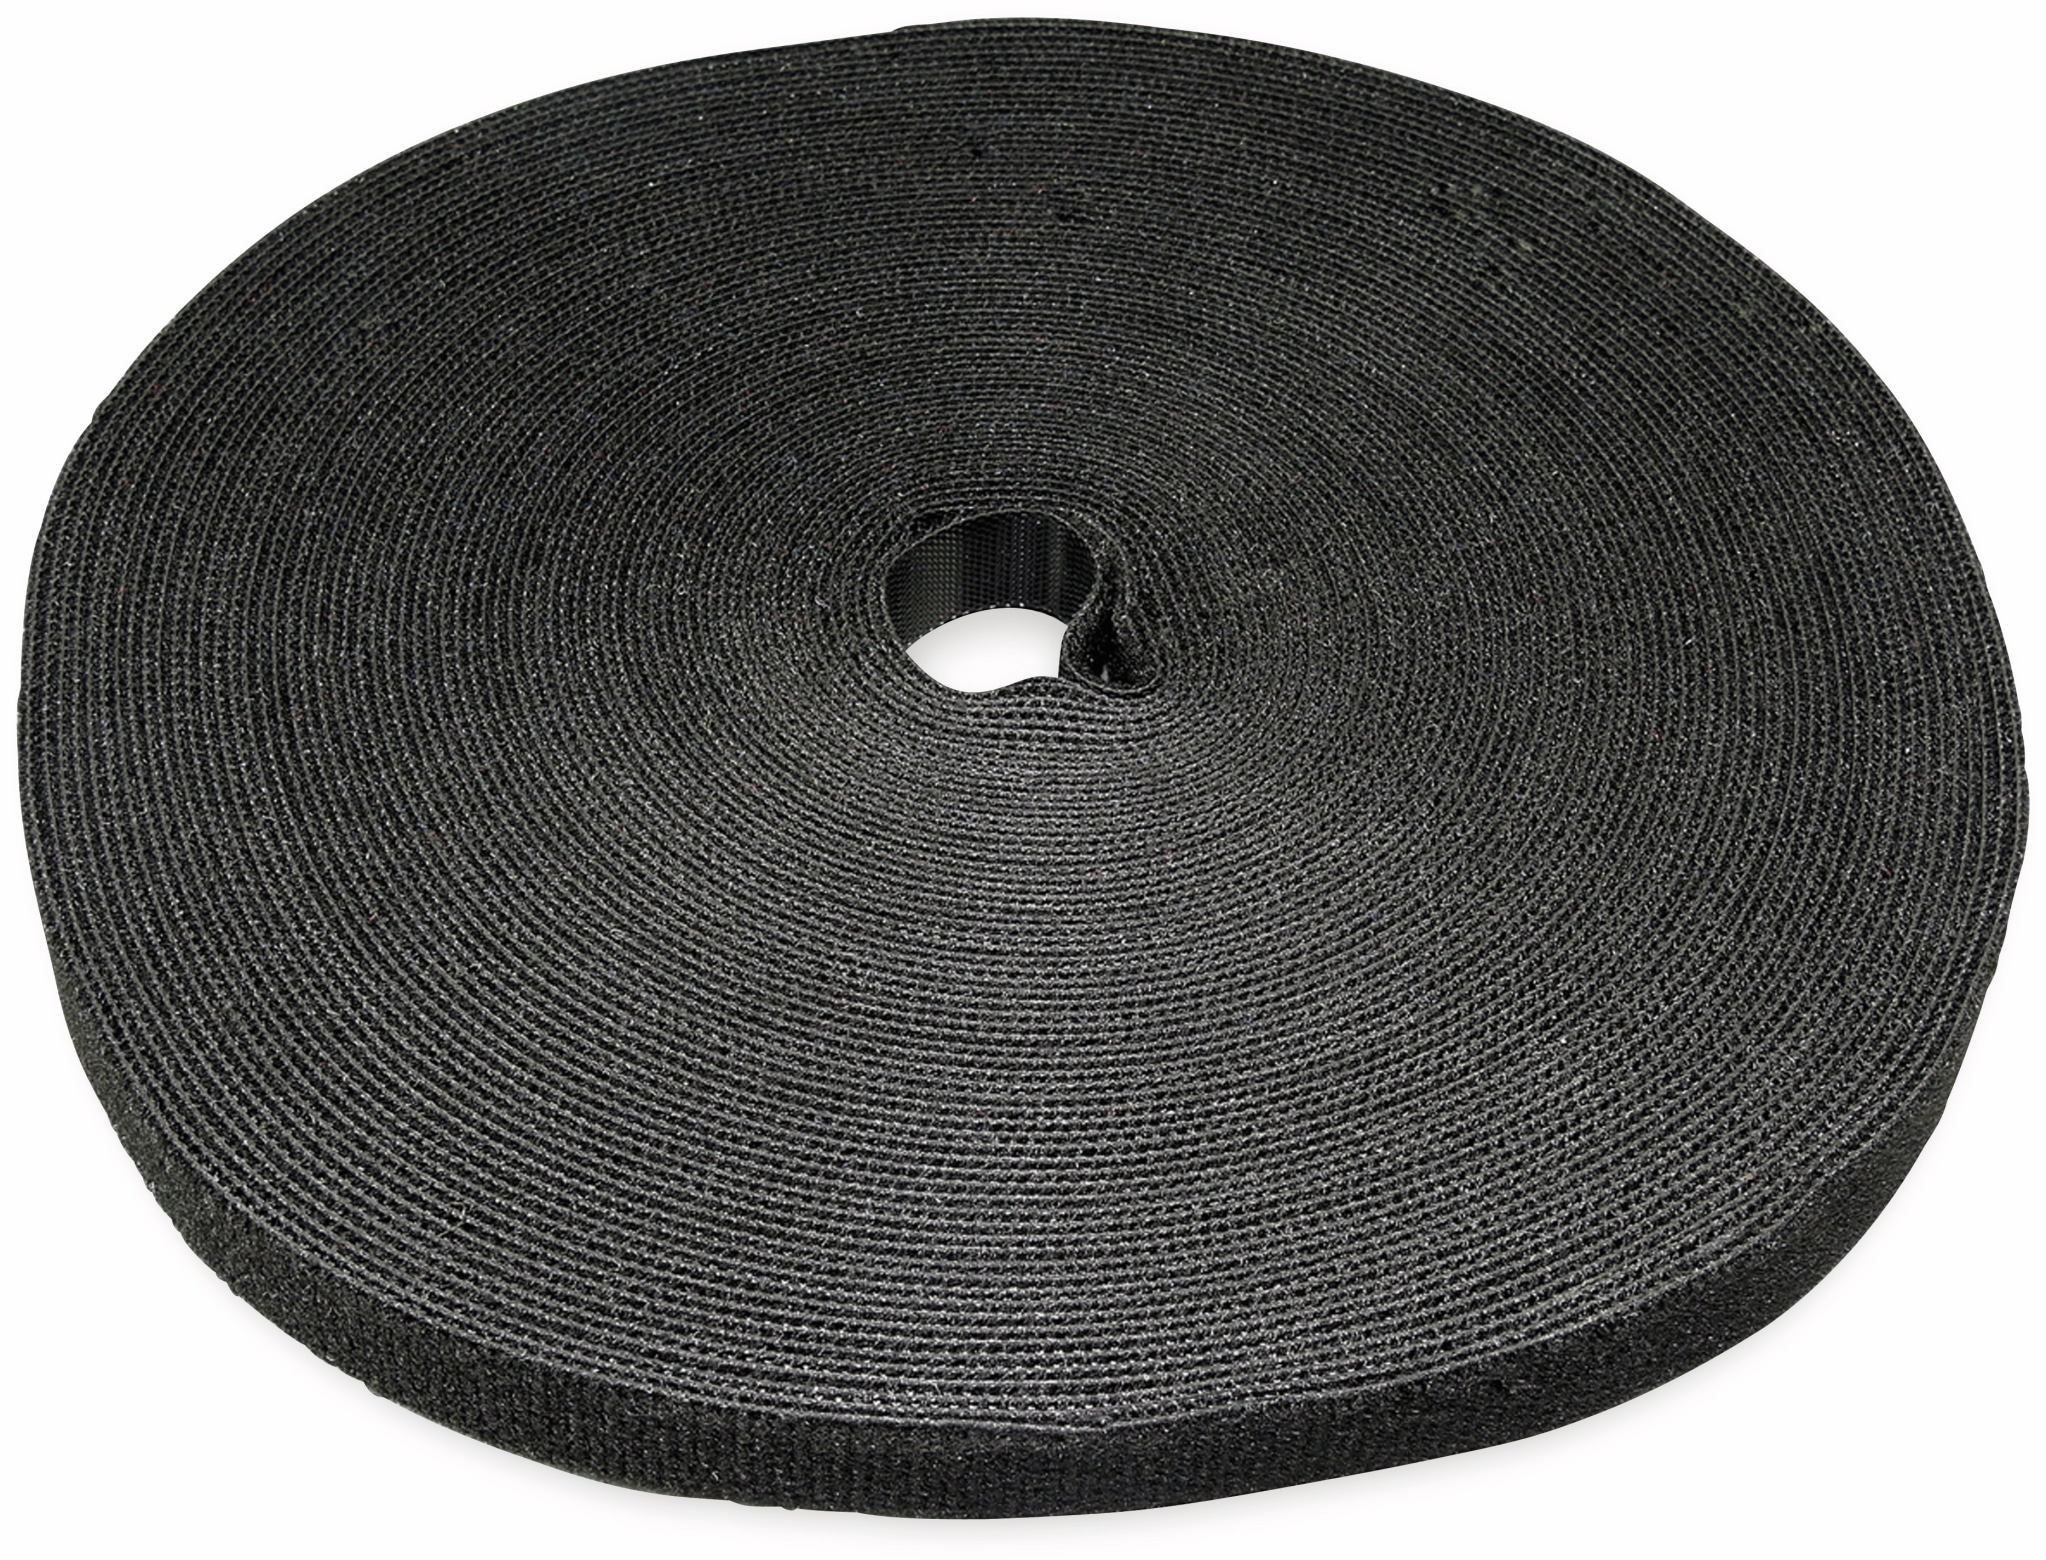 LABEL THE CABLE Klett-Rolle Roll Strap, 25 m, 16 mm, schwarz